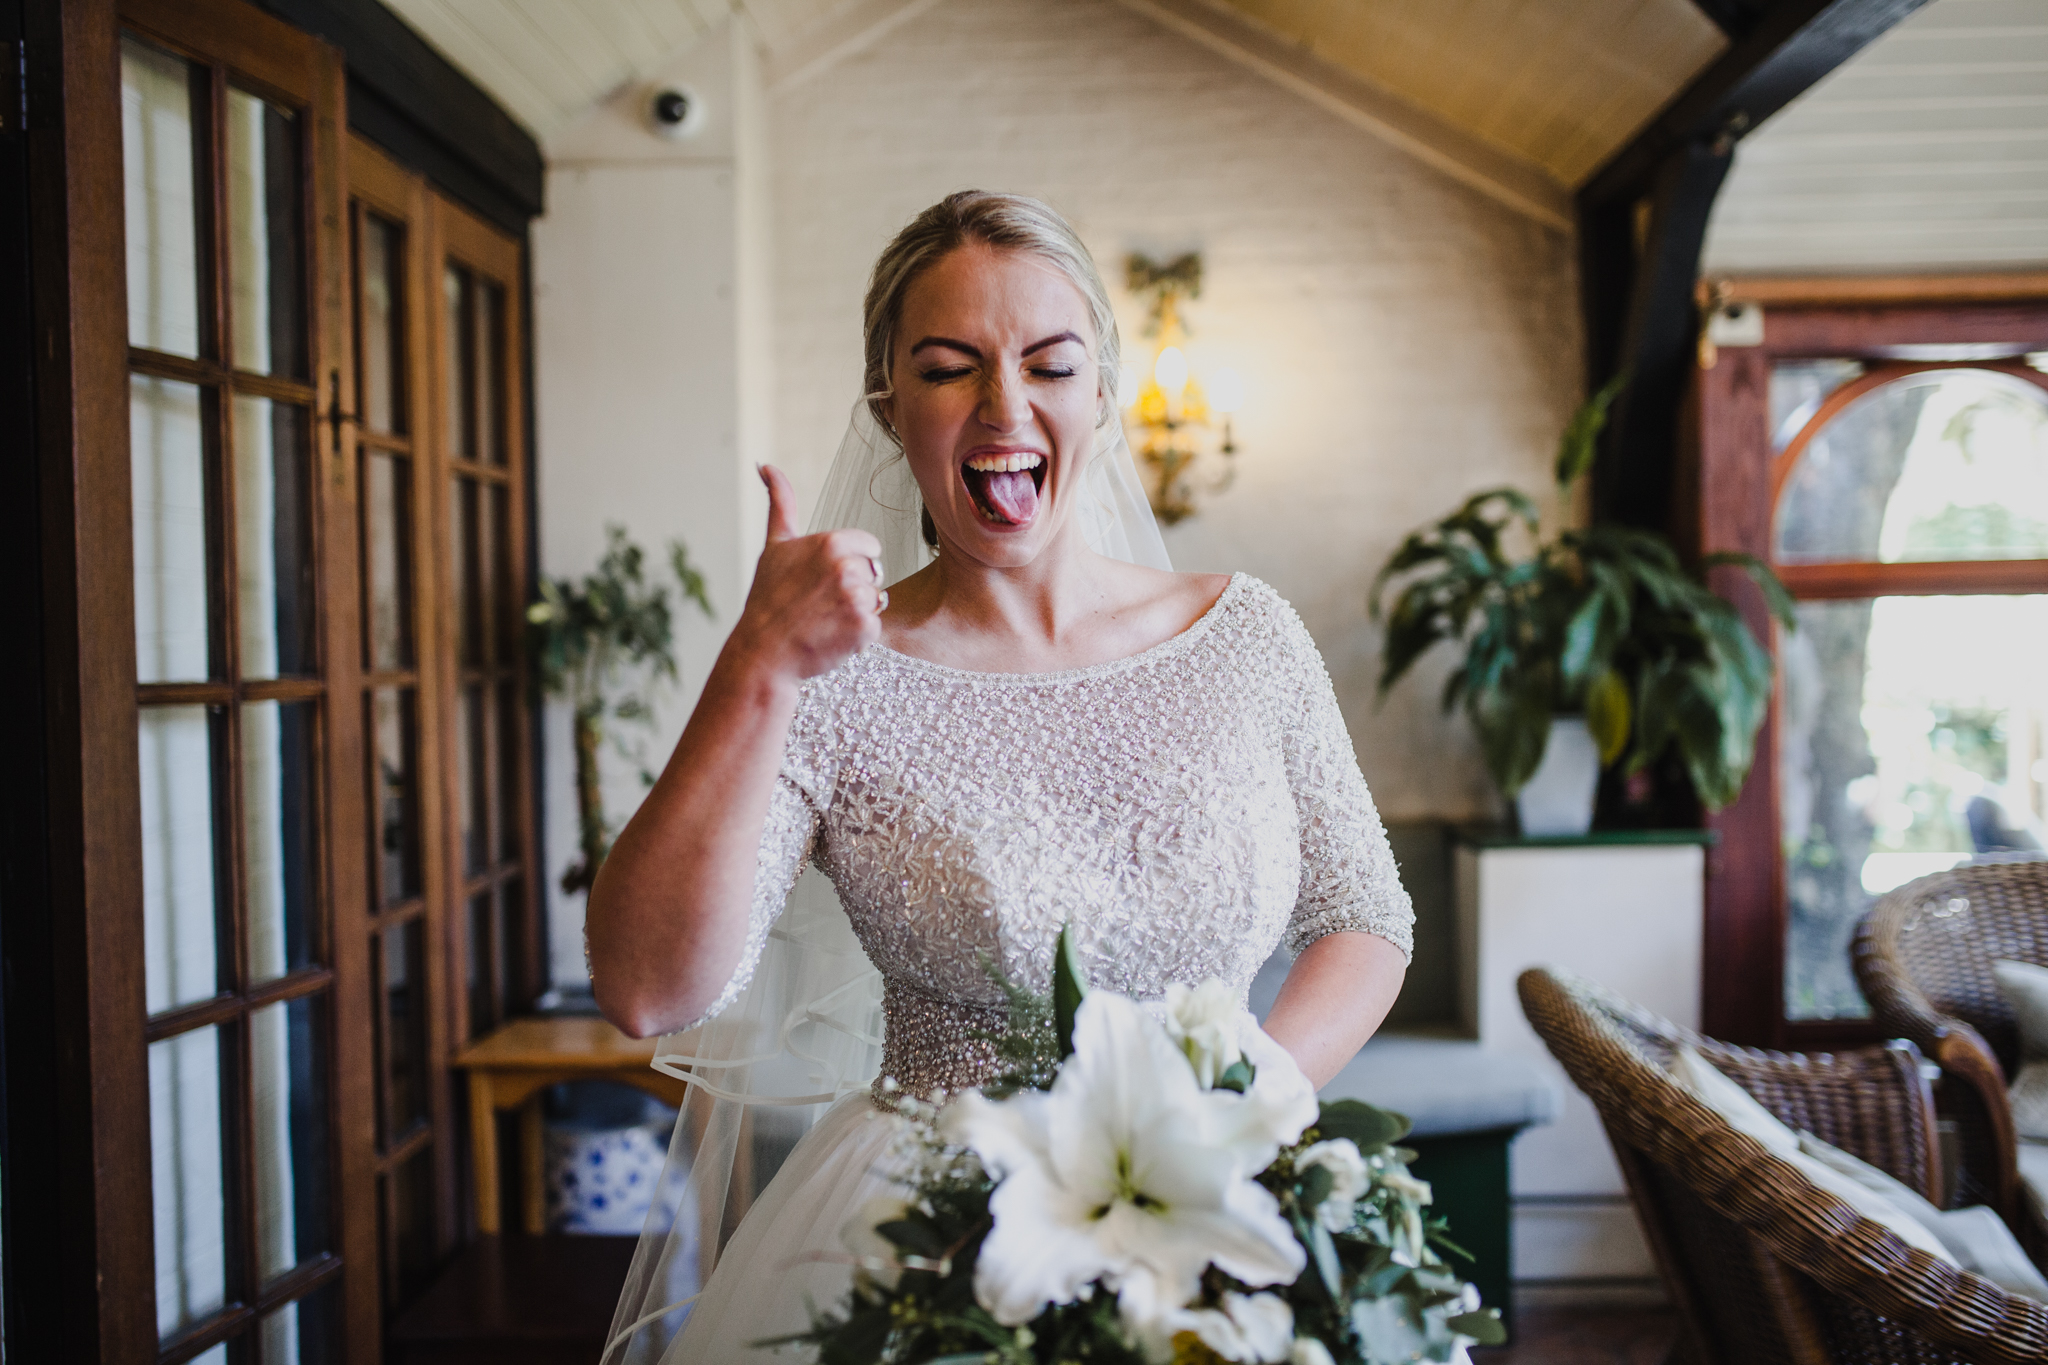 Bride pulling a fun face before the wedding